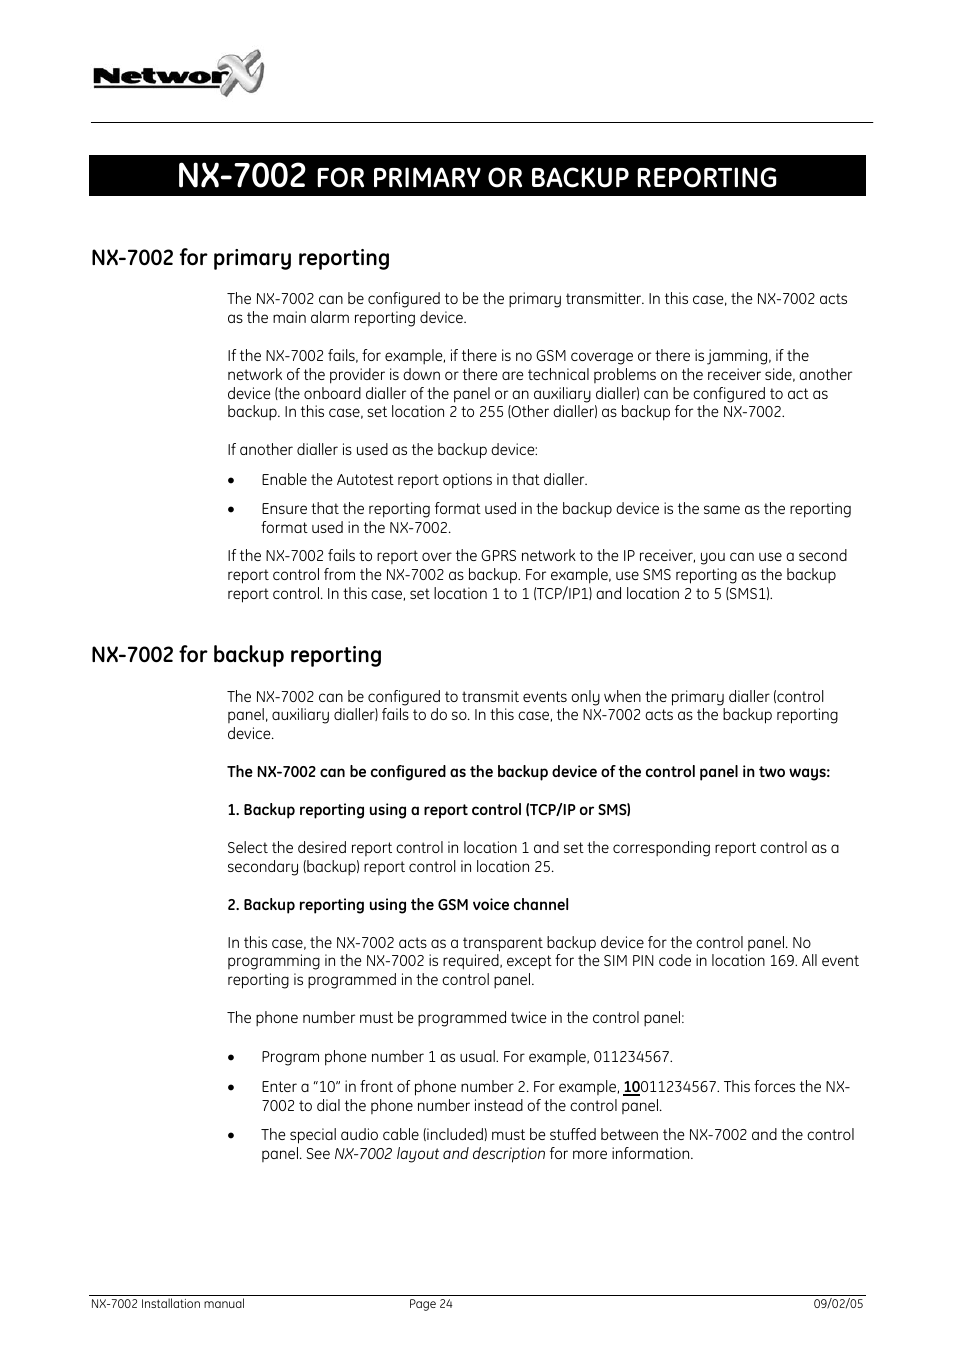 Nx-7002 for primary or backup reporting, Nx-7002 for primary reporting, Nx-7002 for backup reporting | Nx-7002, For primary reporting, For backup reporting, For primary or backup reporting | GE NetworX NX-7002 User Manual | Page 24 / 39